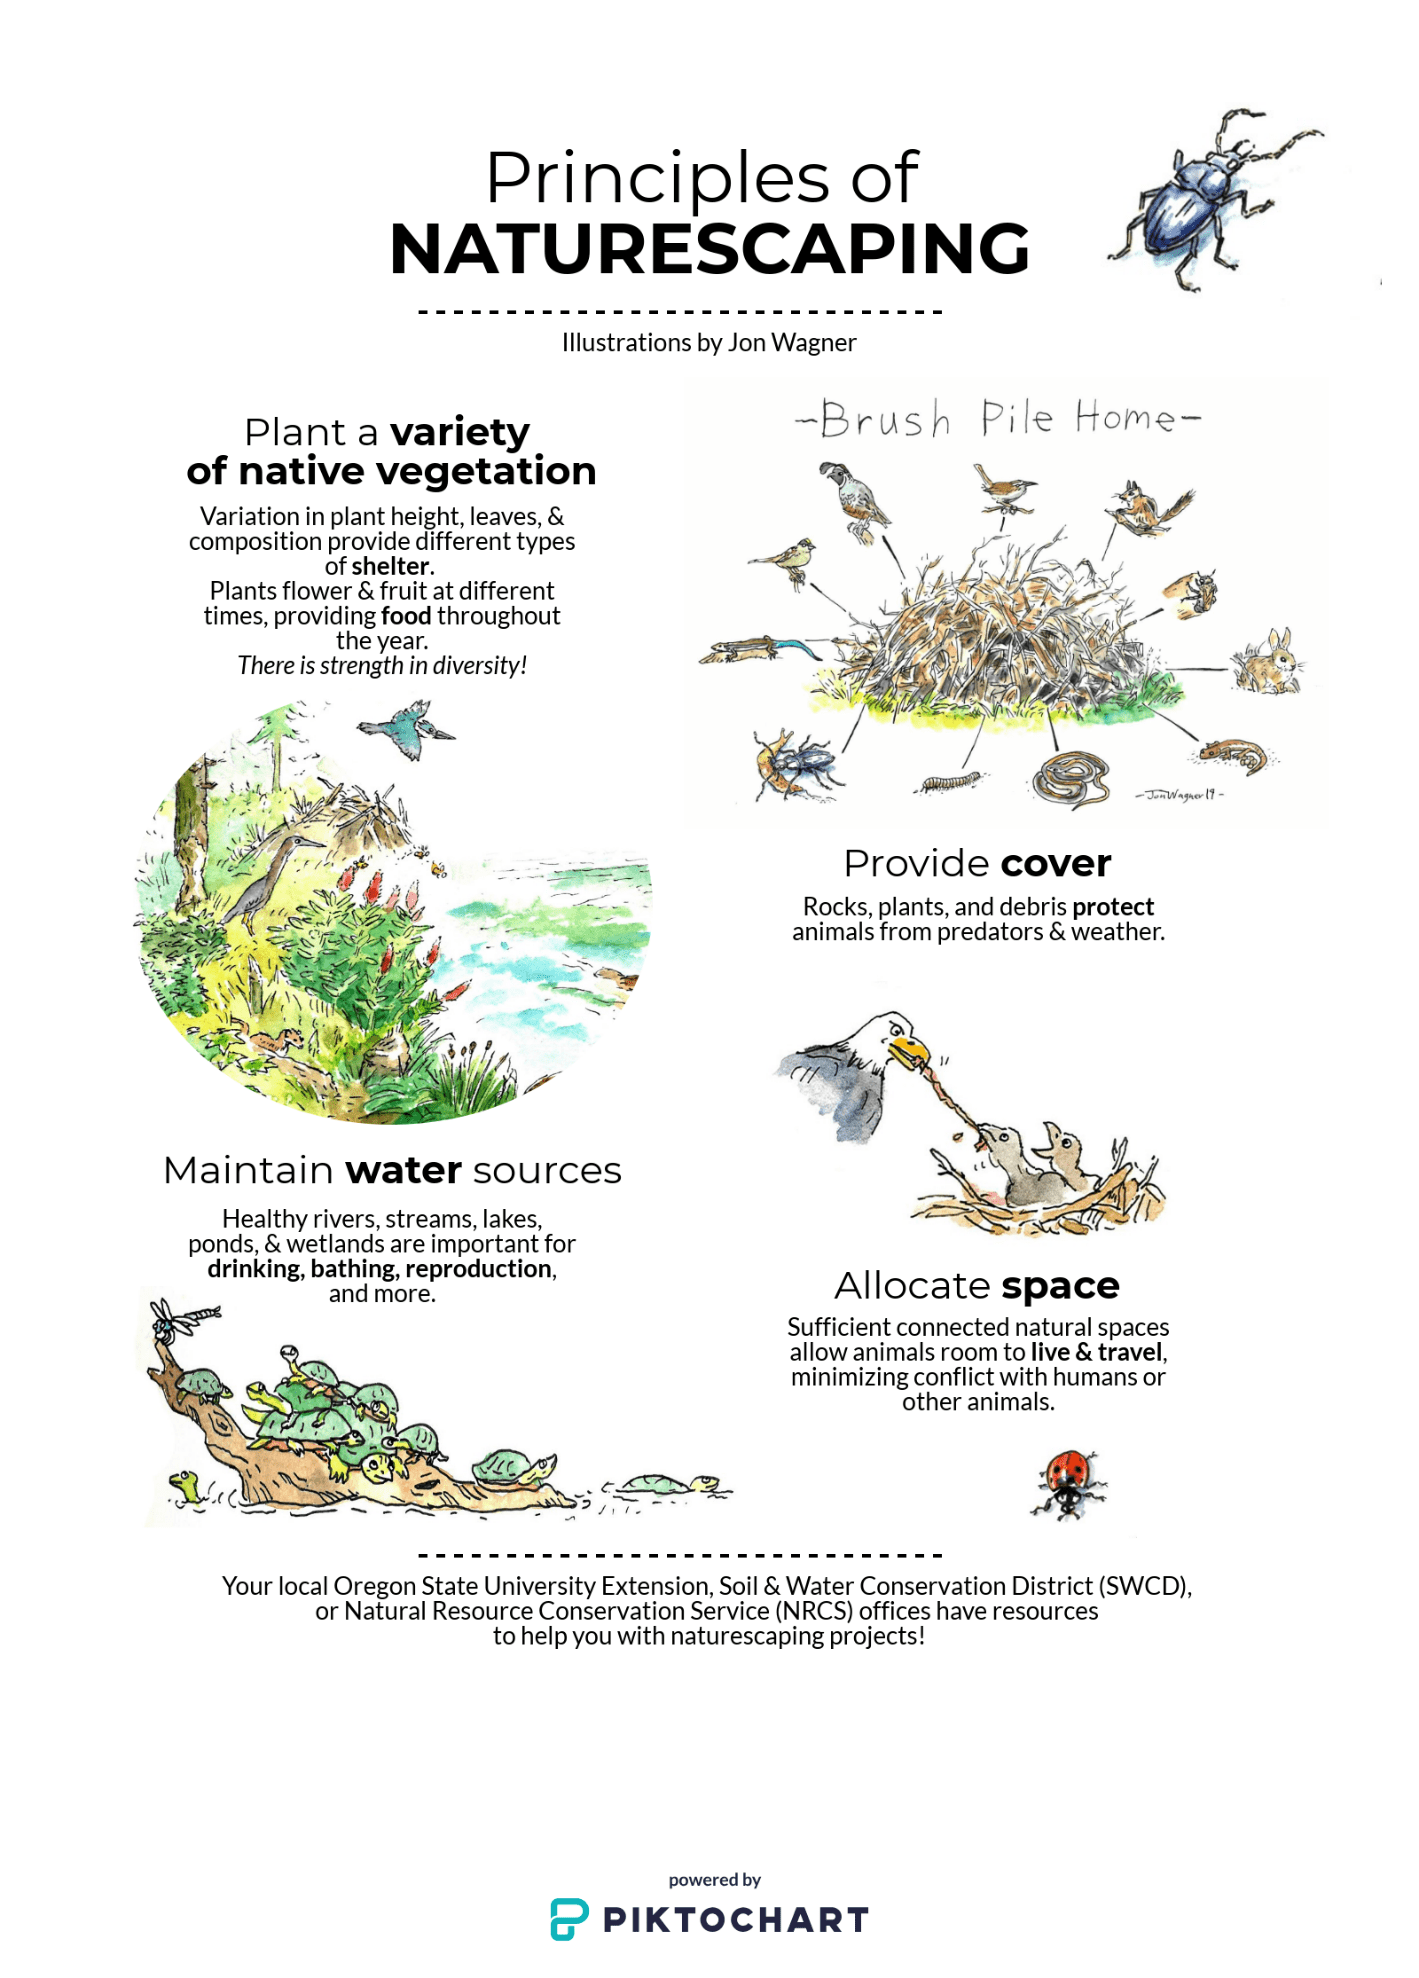 Principles of Naturescaping